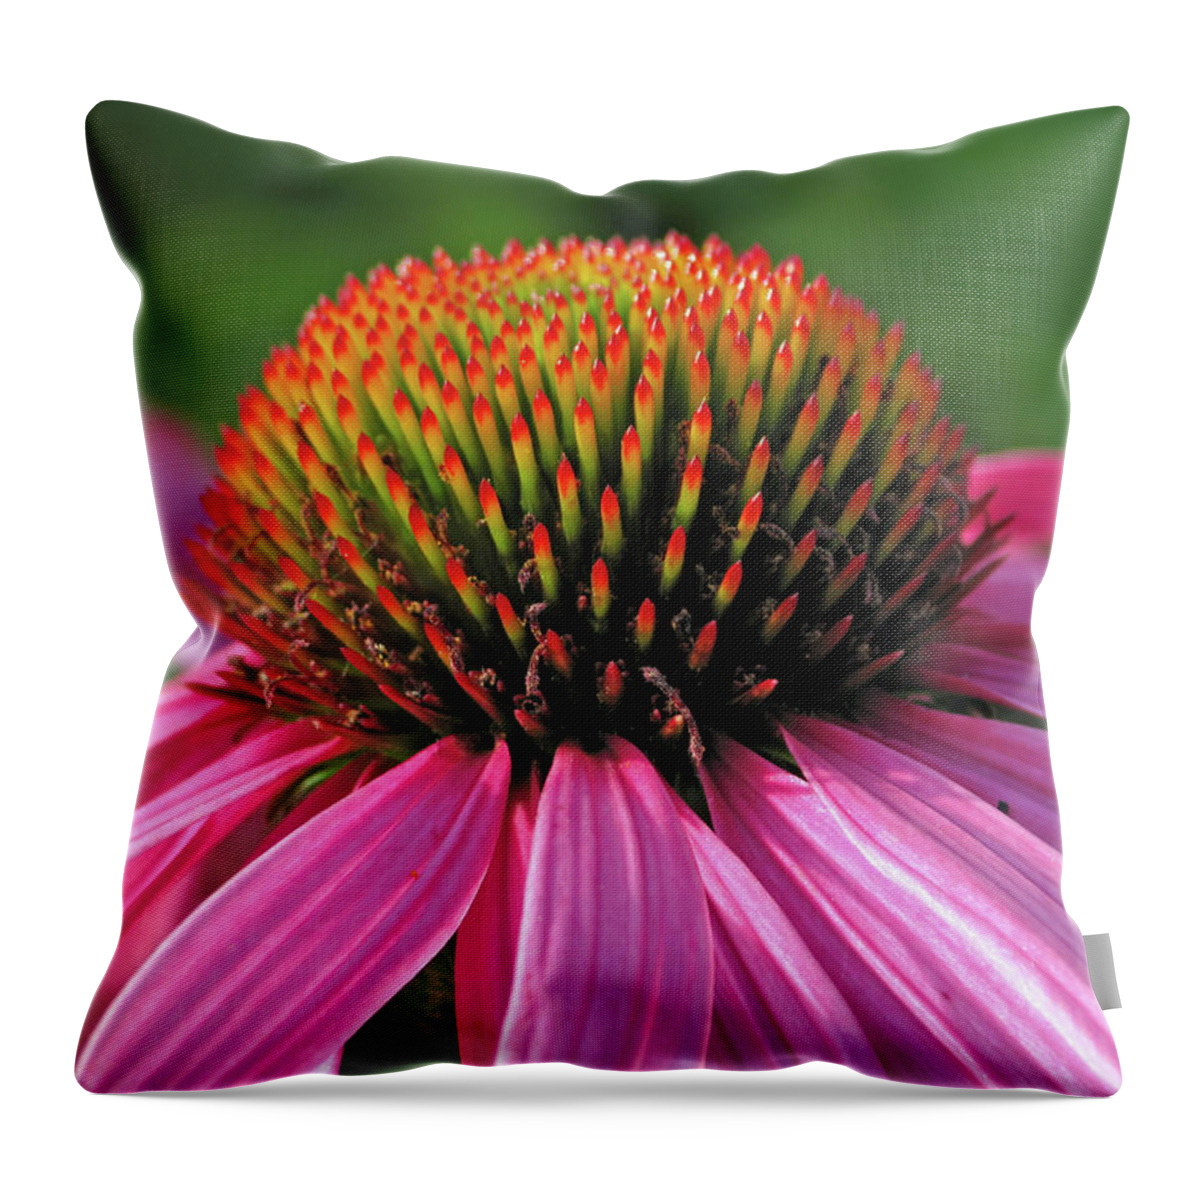 Summer Throw Pillow featuring the photograph Summer Beauty by Lens Art Photography By Larry Trager